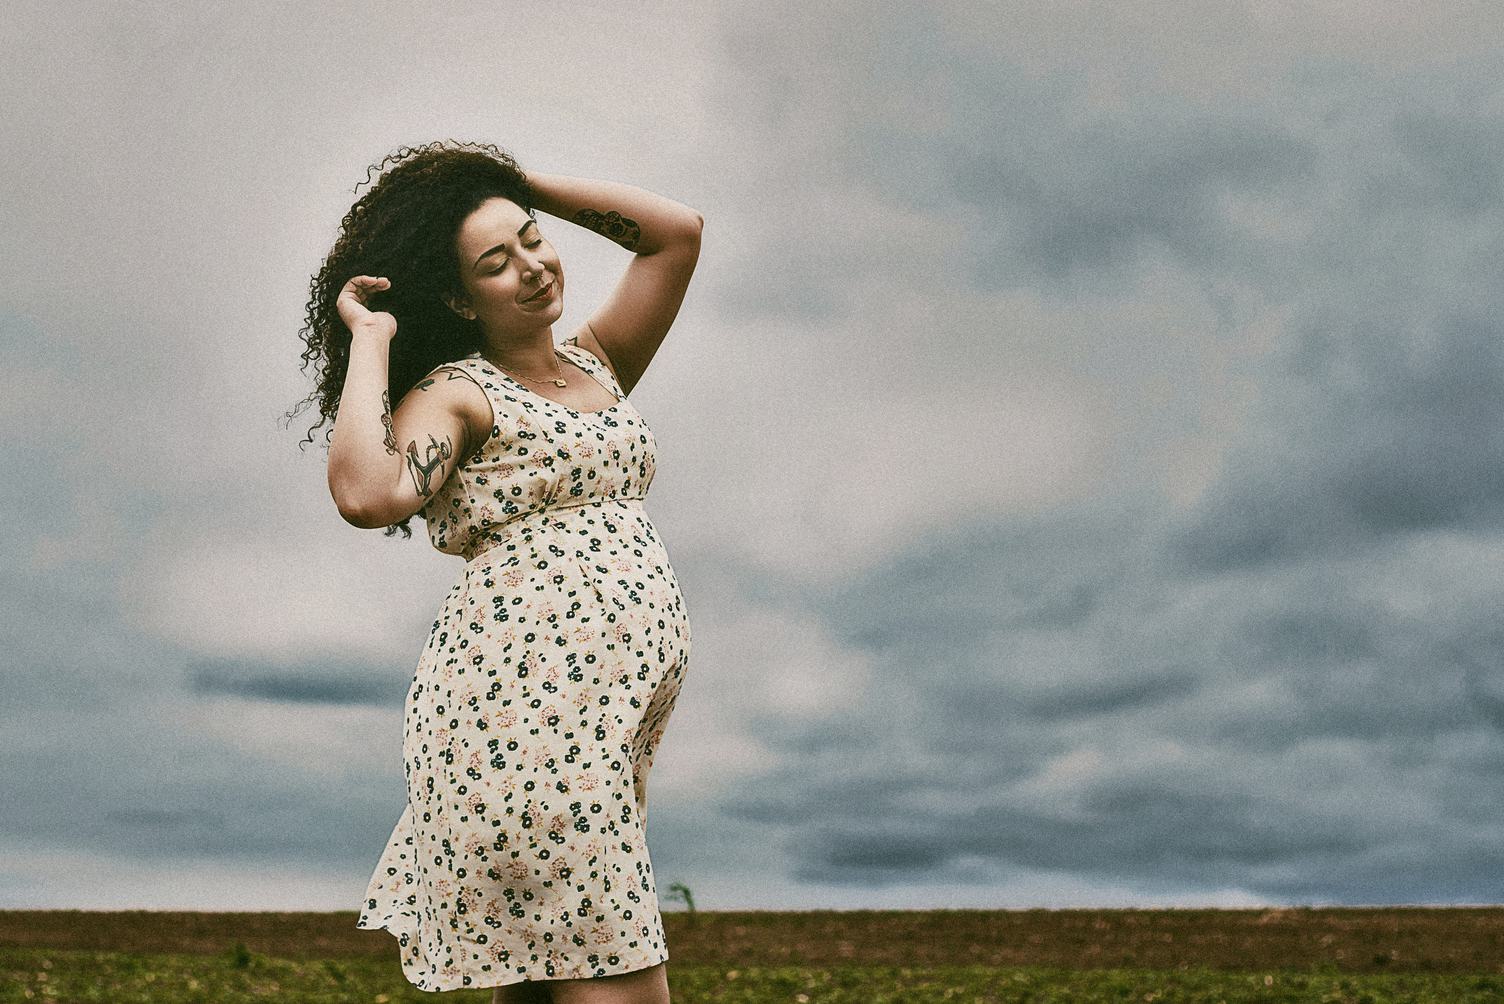 Pregnant Woman with Curly Hair Walking on Field